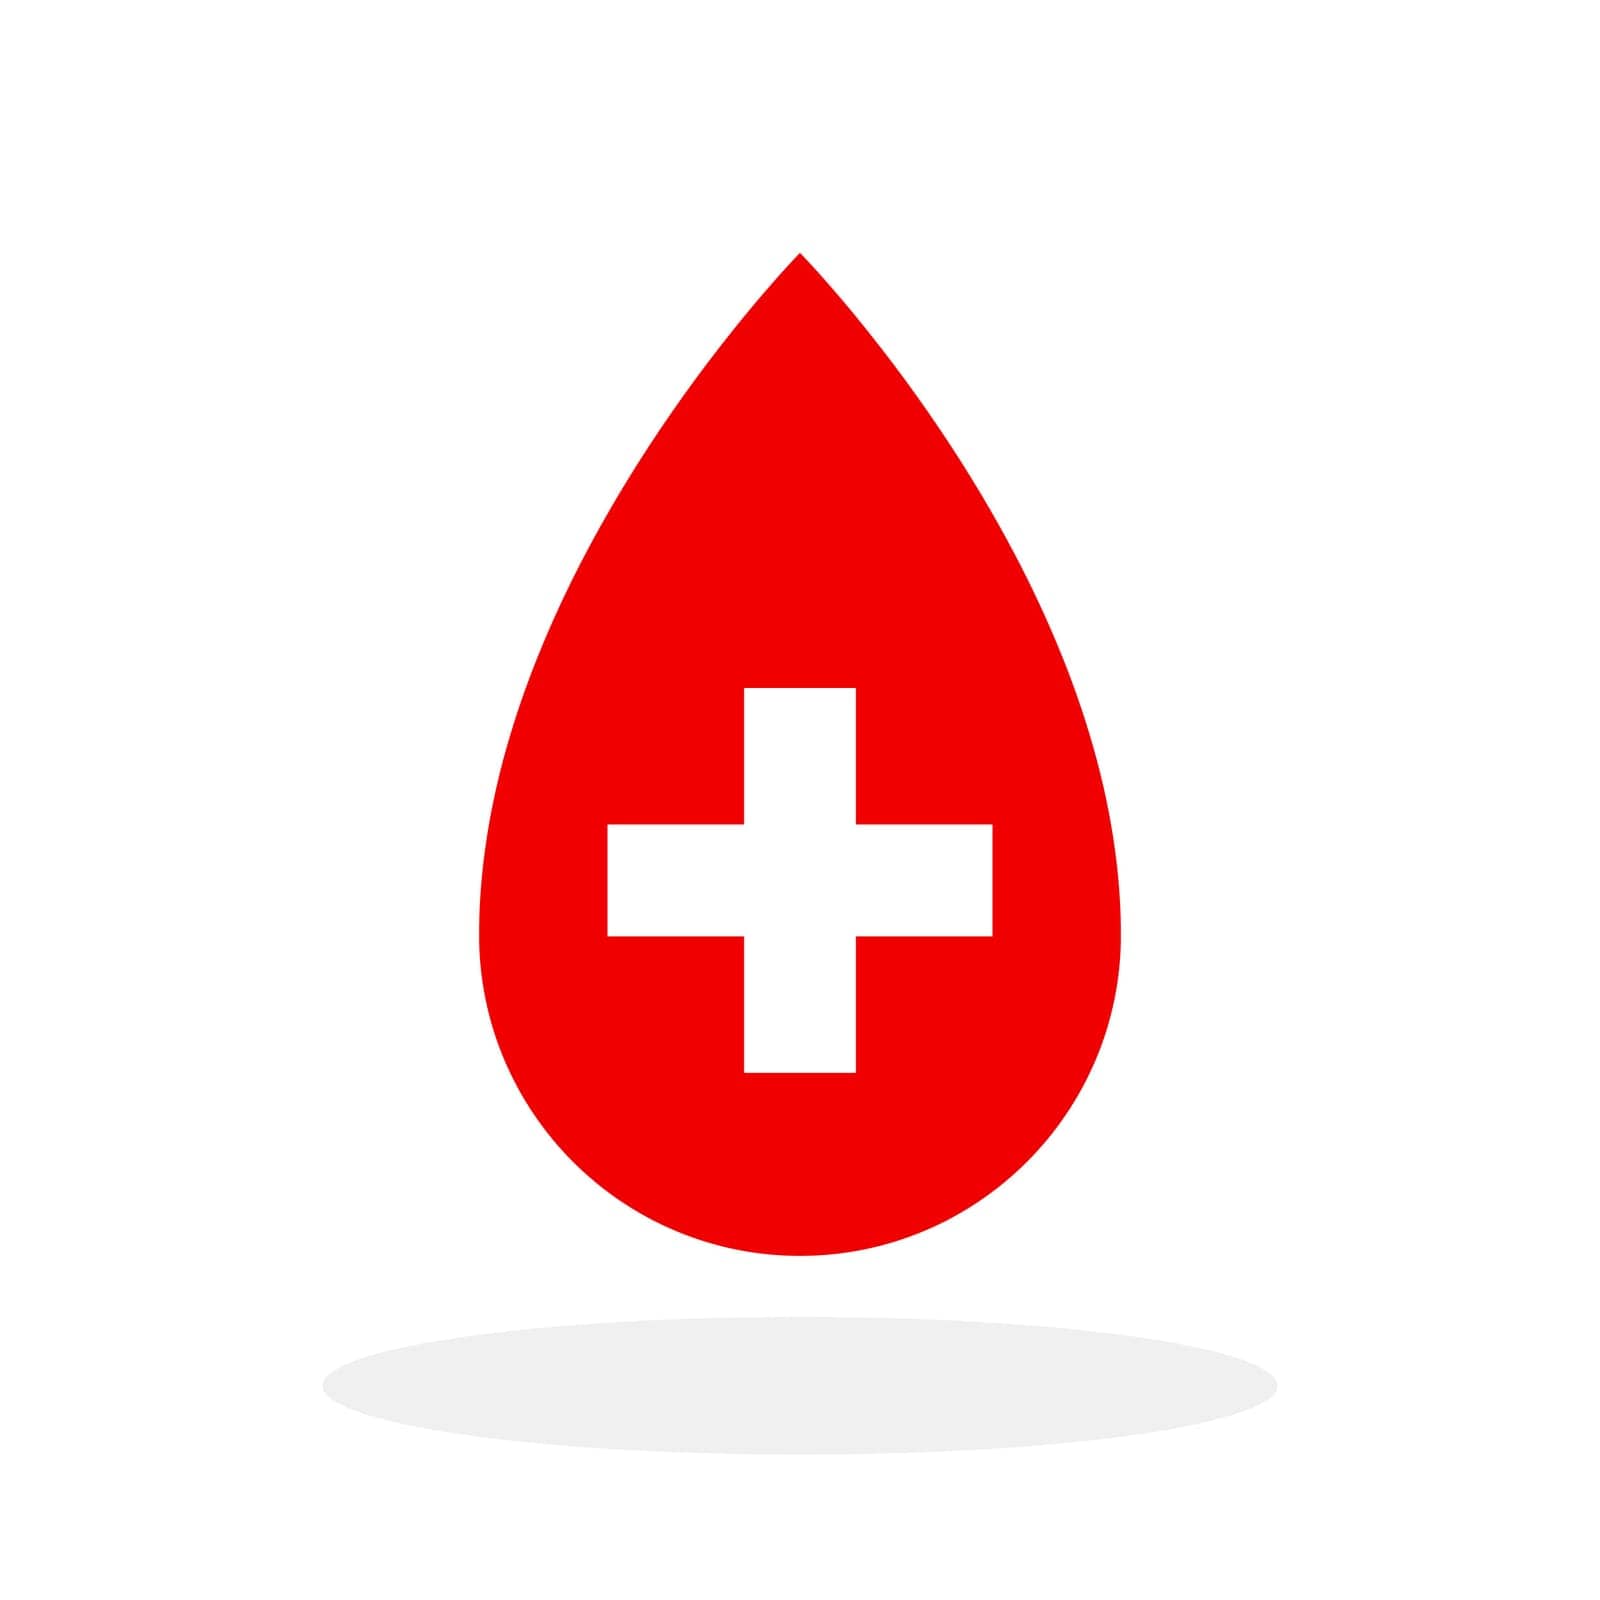 Blood drop icon. Blood donation concept. Red blood drop symbol with medical cross. Vector illustration.